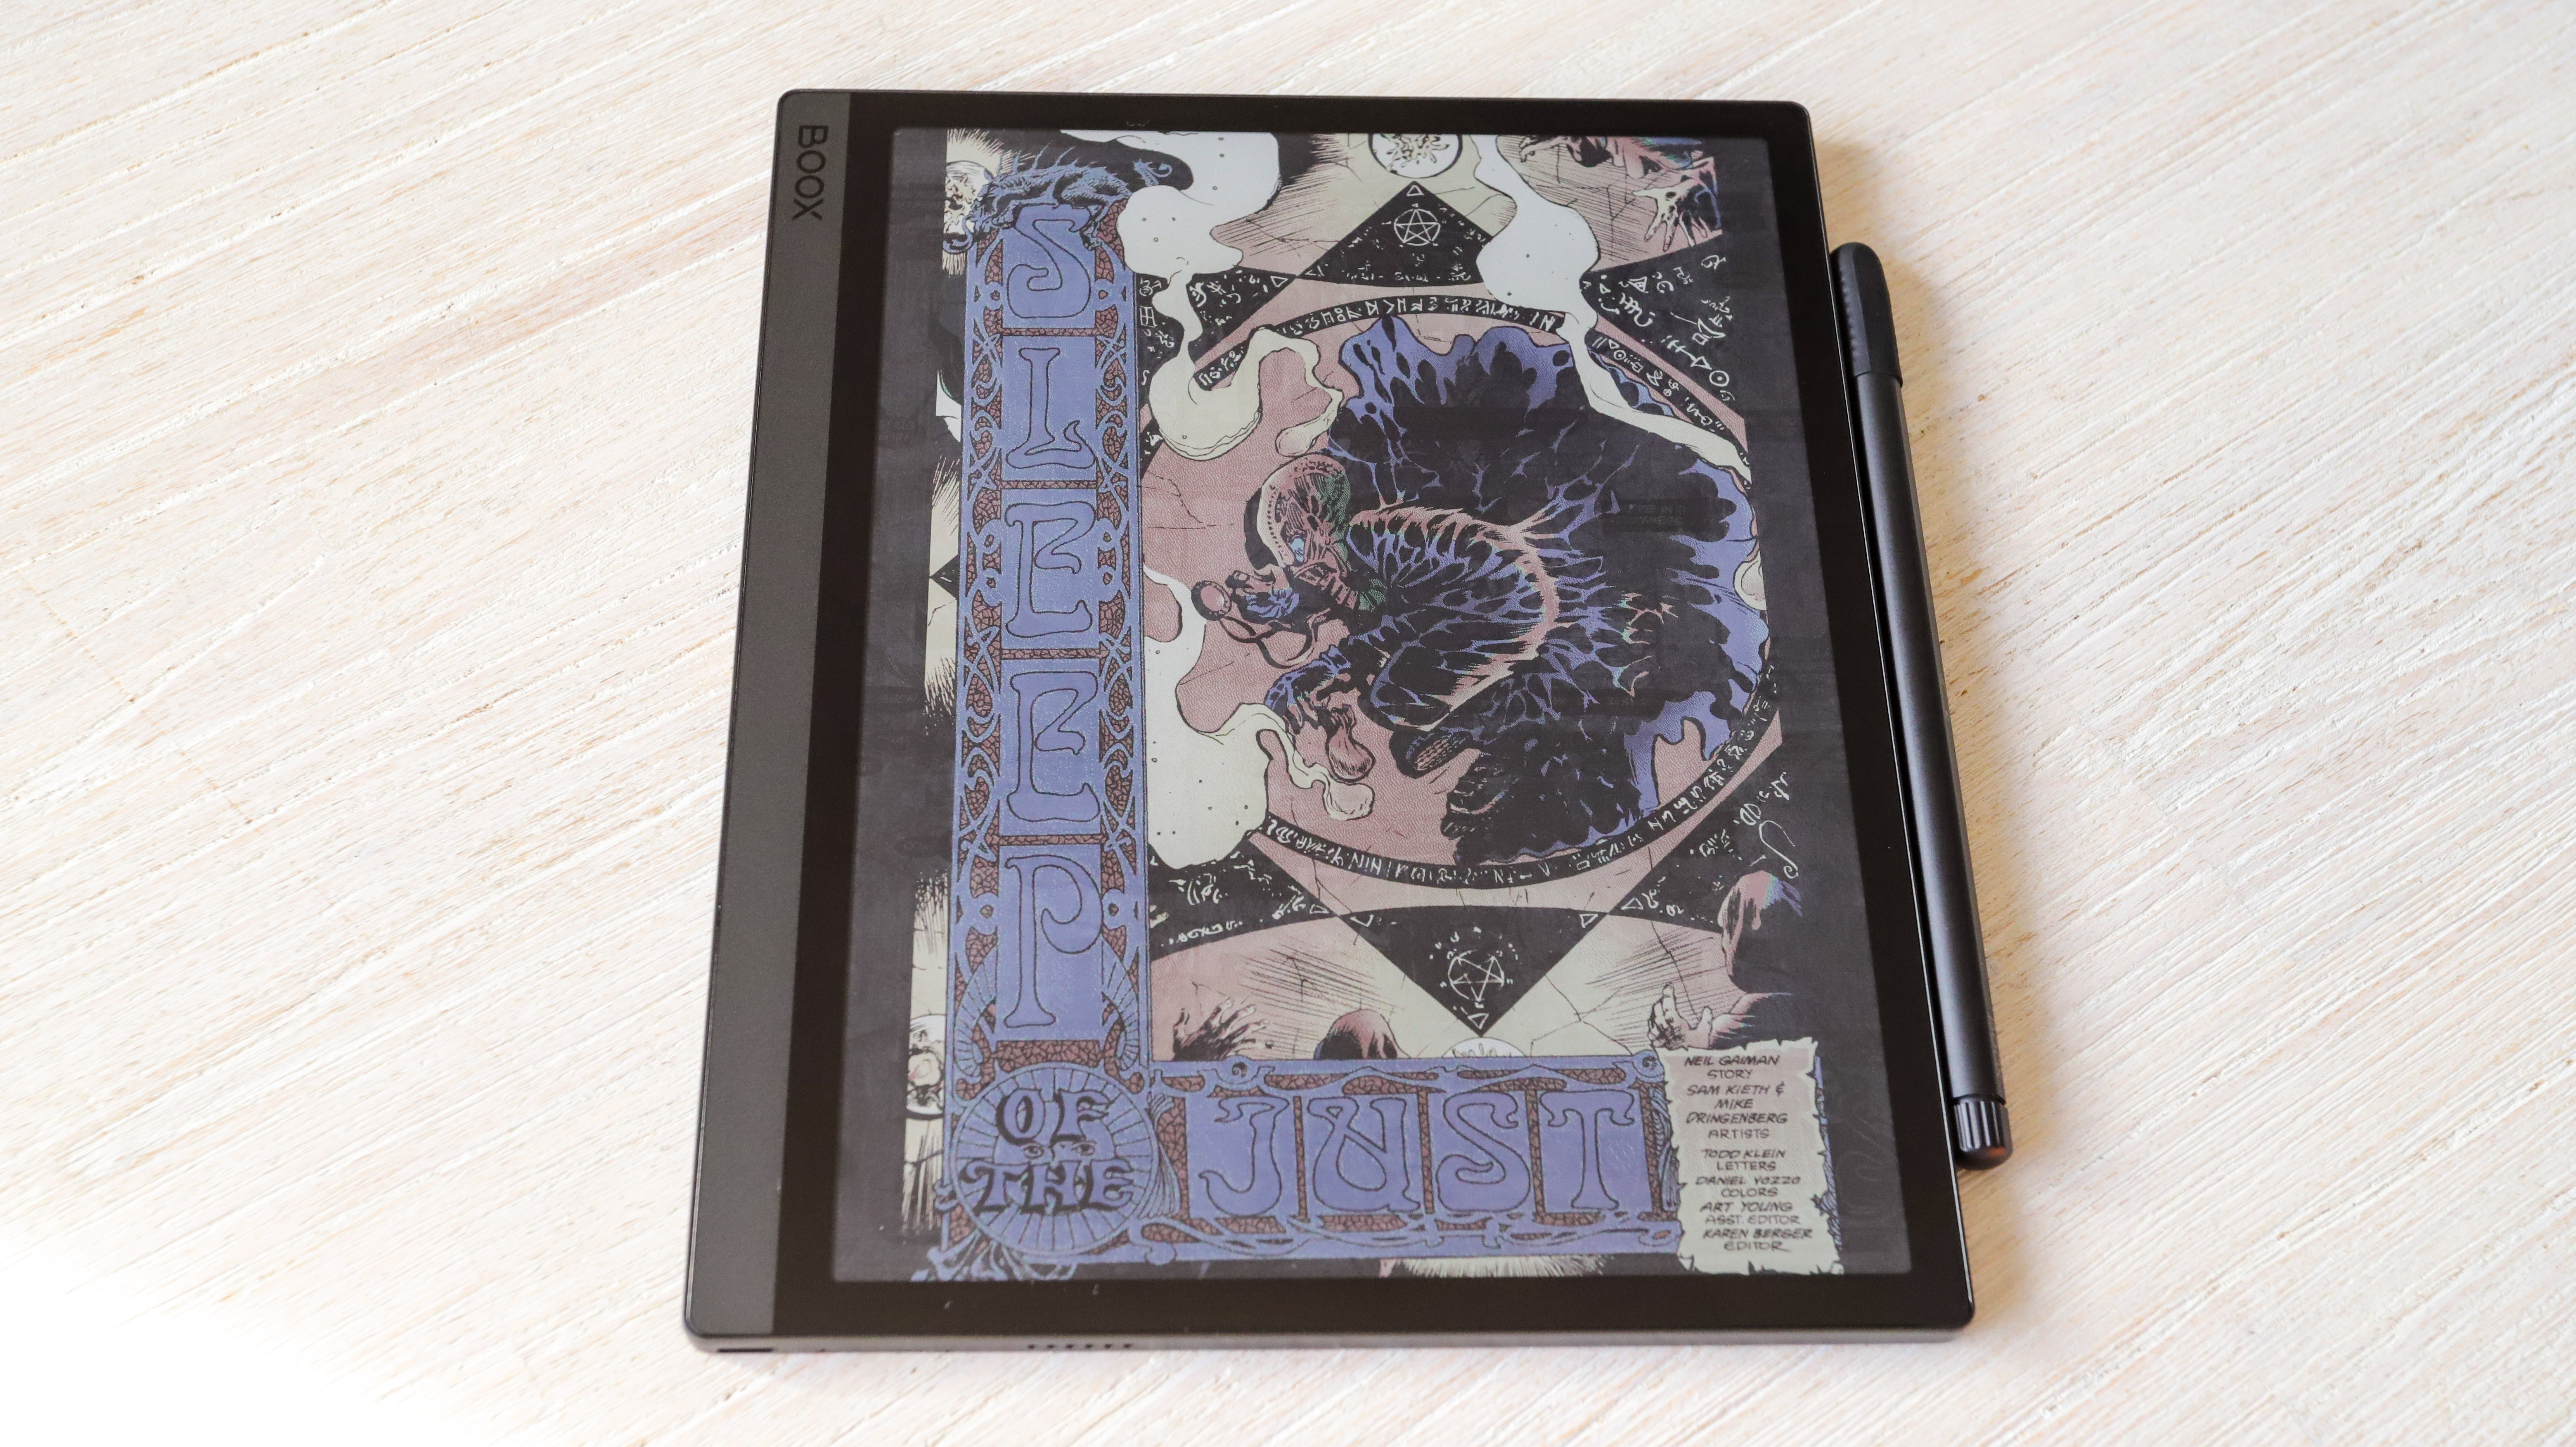 A color graphic novel page displayed on the Onyx Boox Tab Ultra C